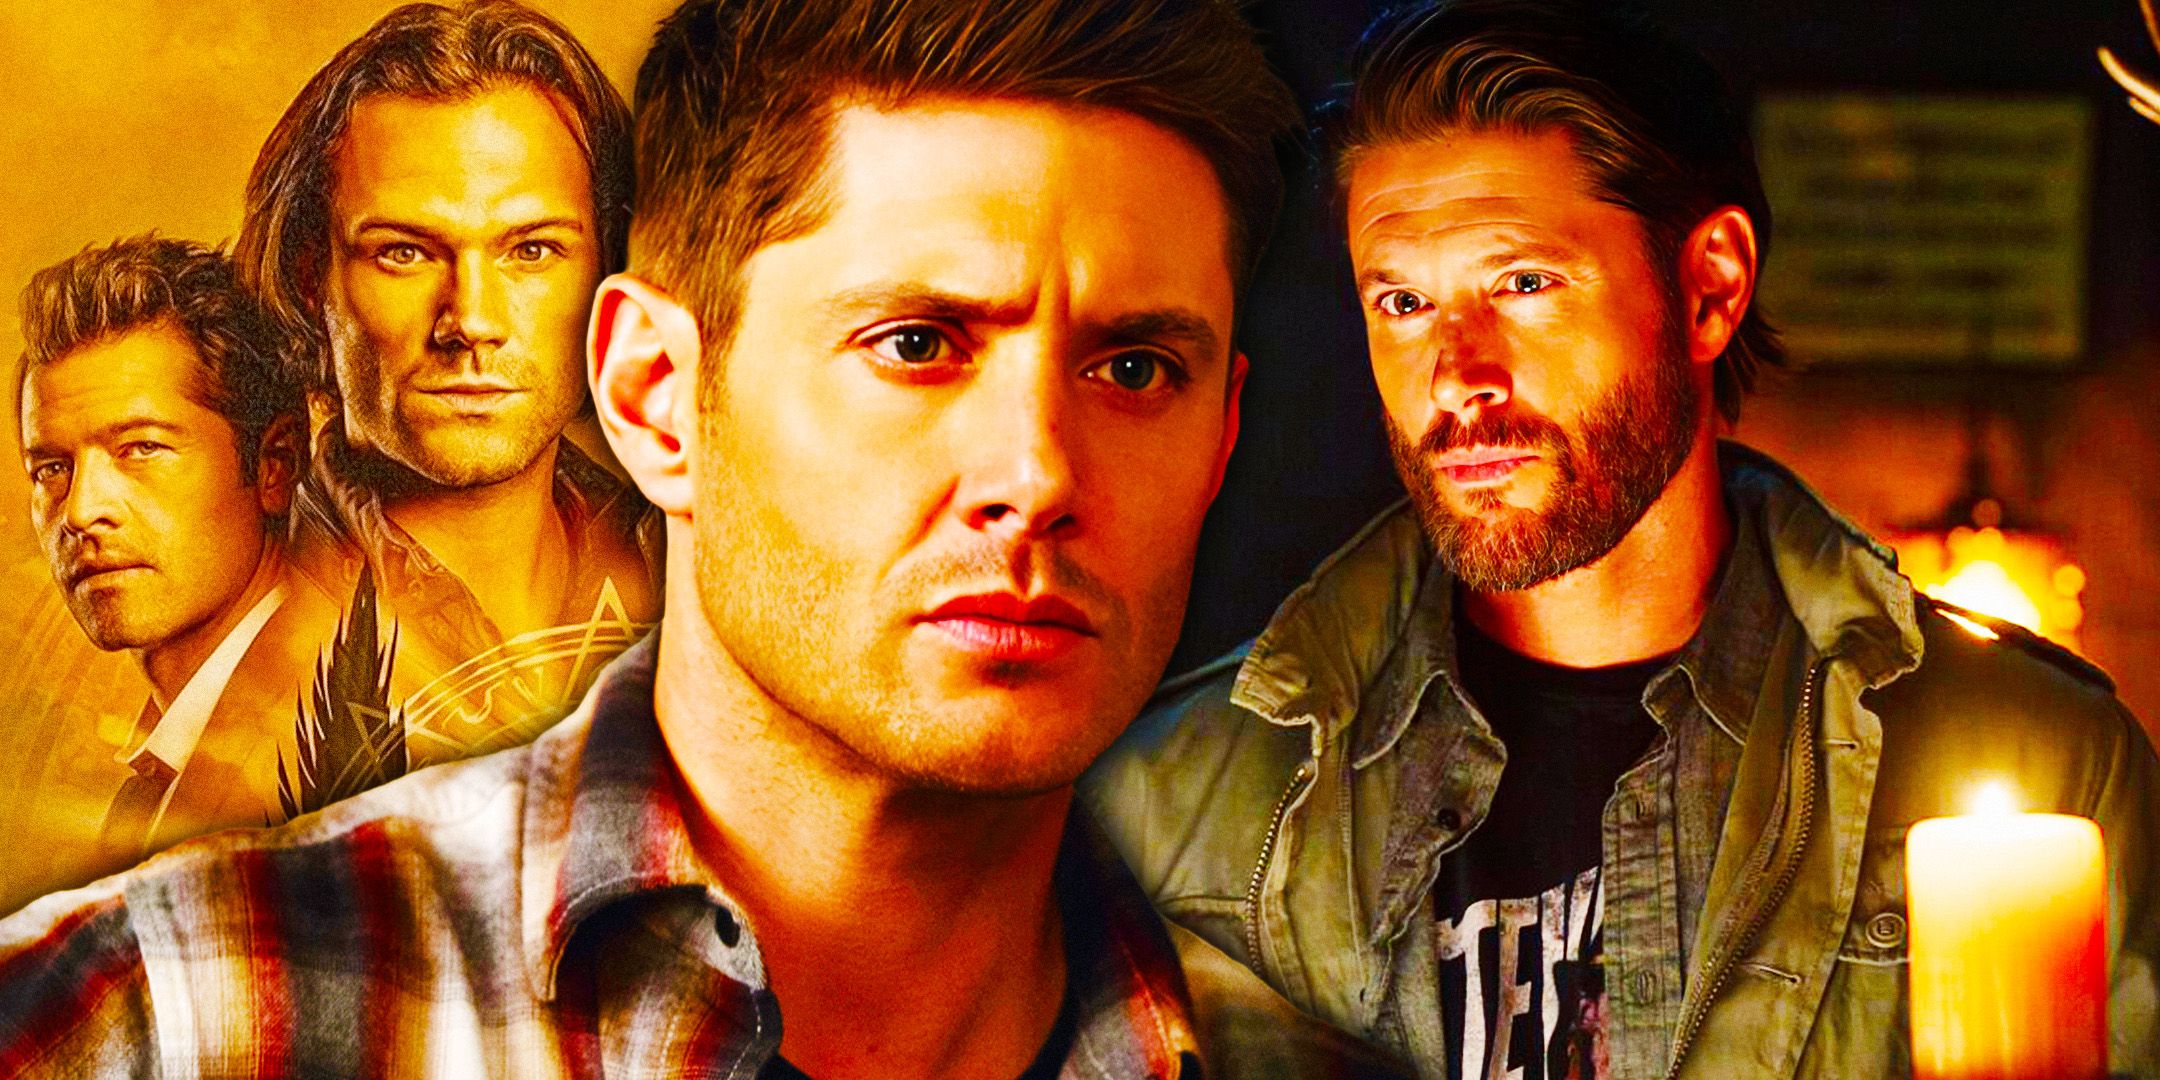 Jensen Ackles’ New TV Show Is A Great Supernatural Replacement While Waiting For A Revival